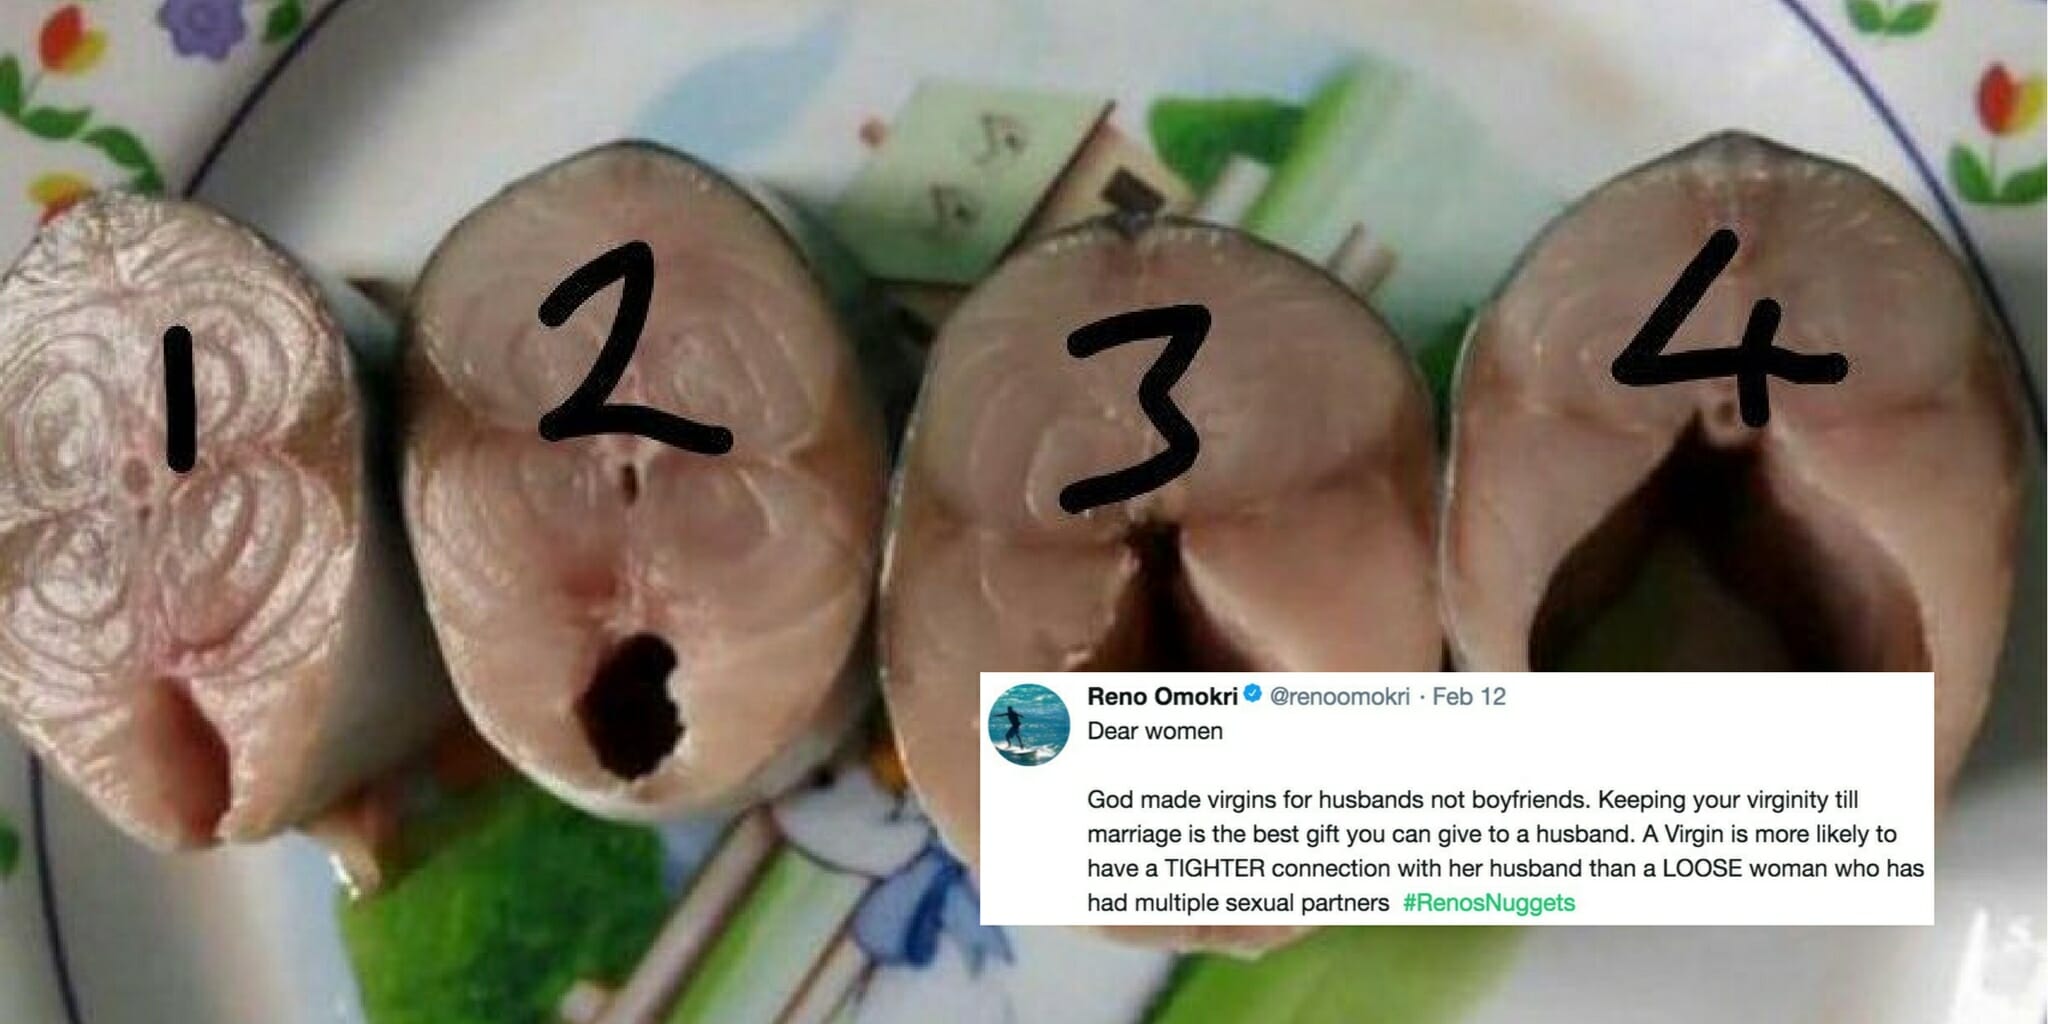 Man Uses Fish Filets To Model Stretchy Vaginas, Gets Grilled By Twitter